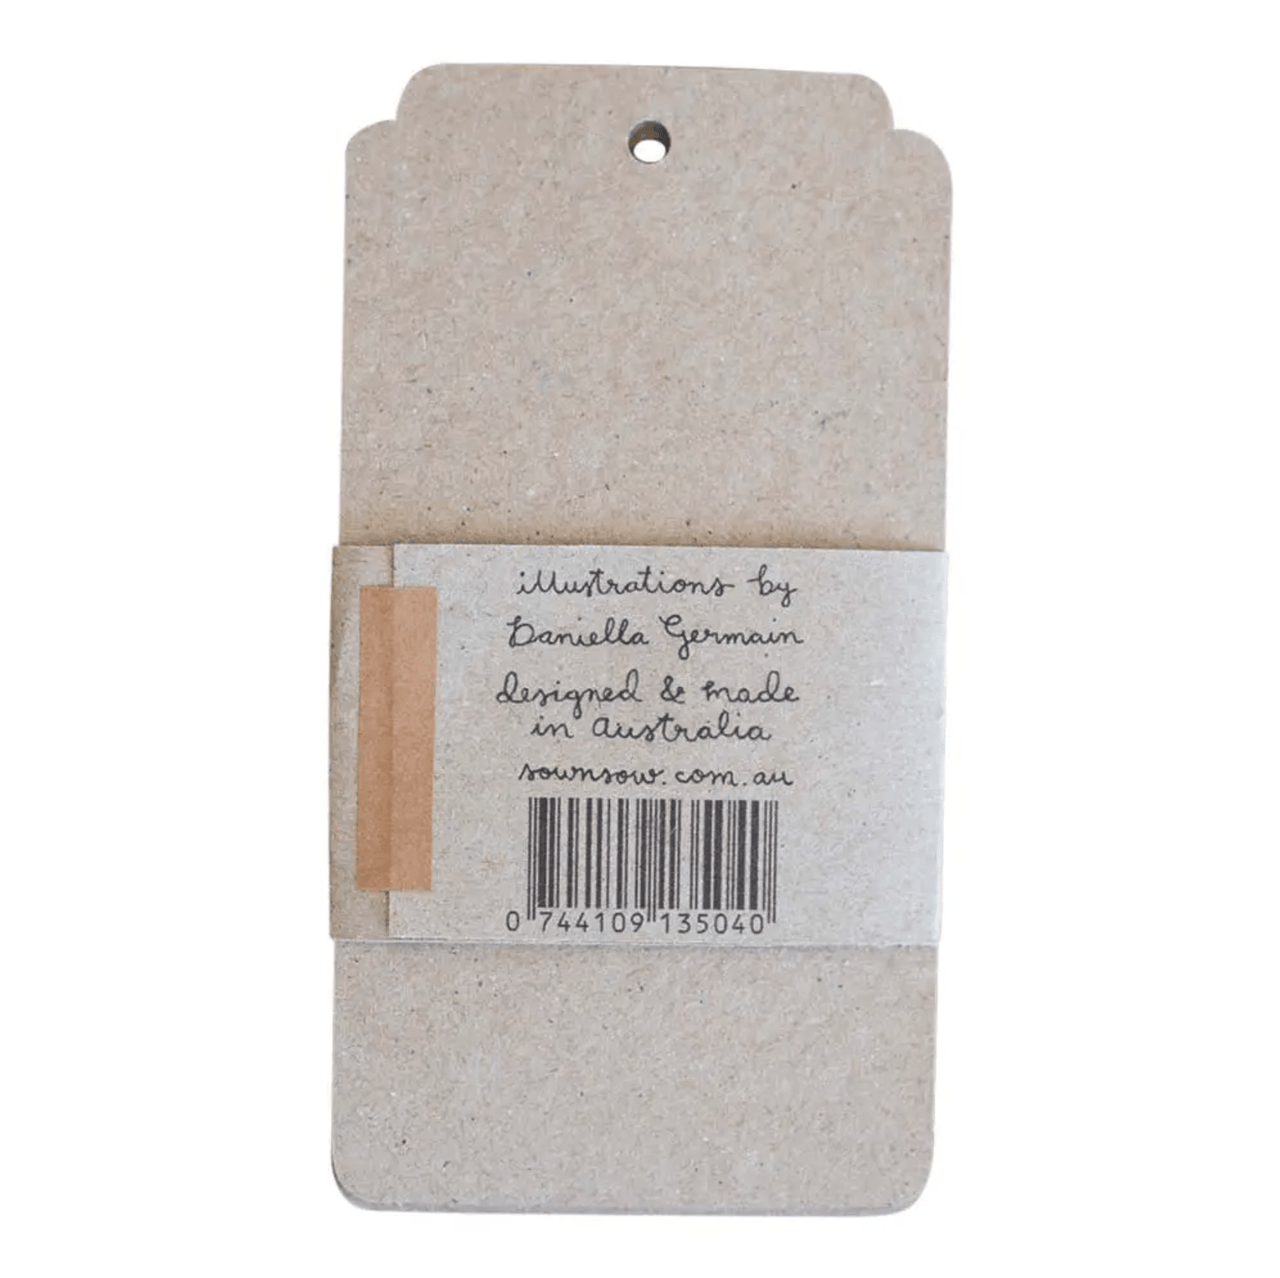 A brown paper Gift Tag - Sweet Pea with a label on it, from Sow n Sow.